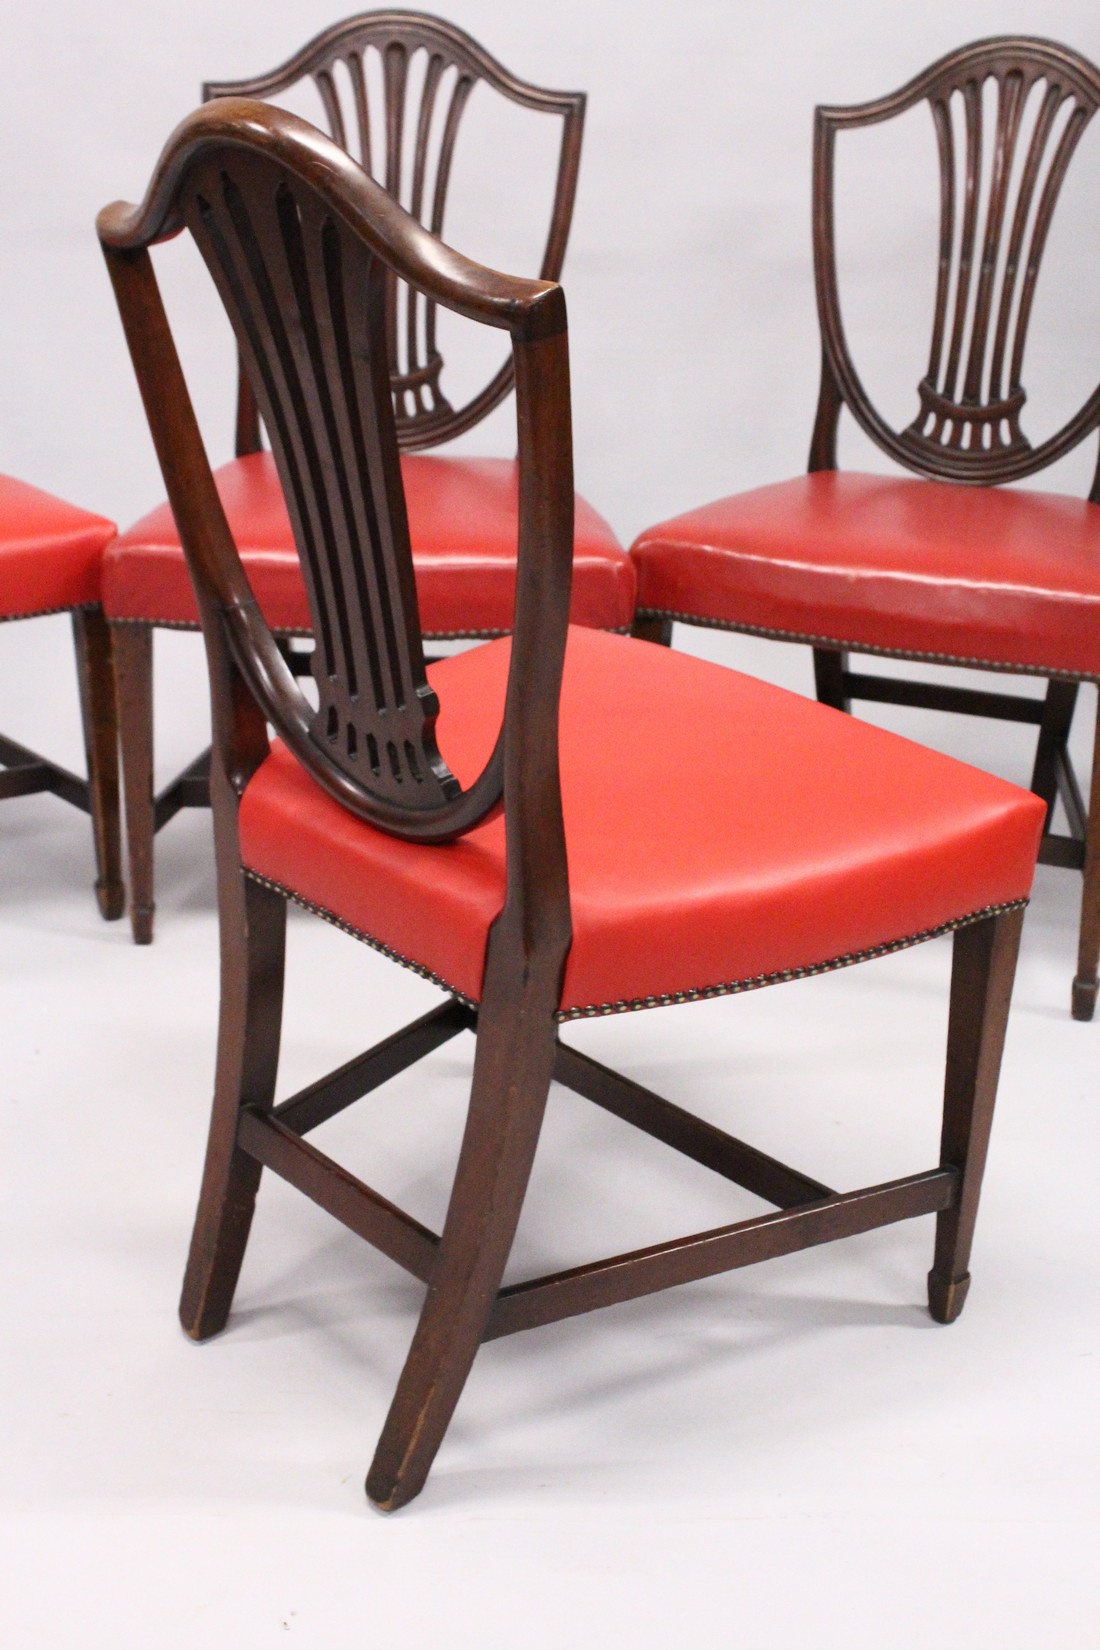 A SET OF FOUR HEPPLEWHITE MAHOGANY SHIELD BACK SINGLE CHAIRS with leather seats. - Image 3 of 4